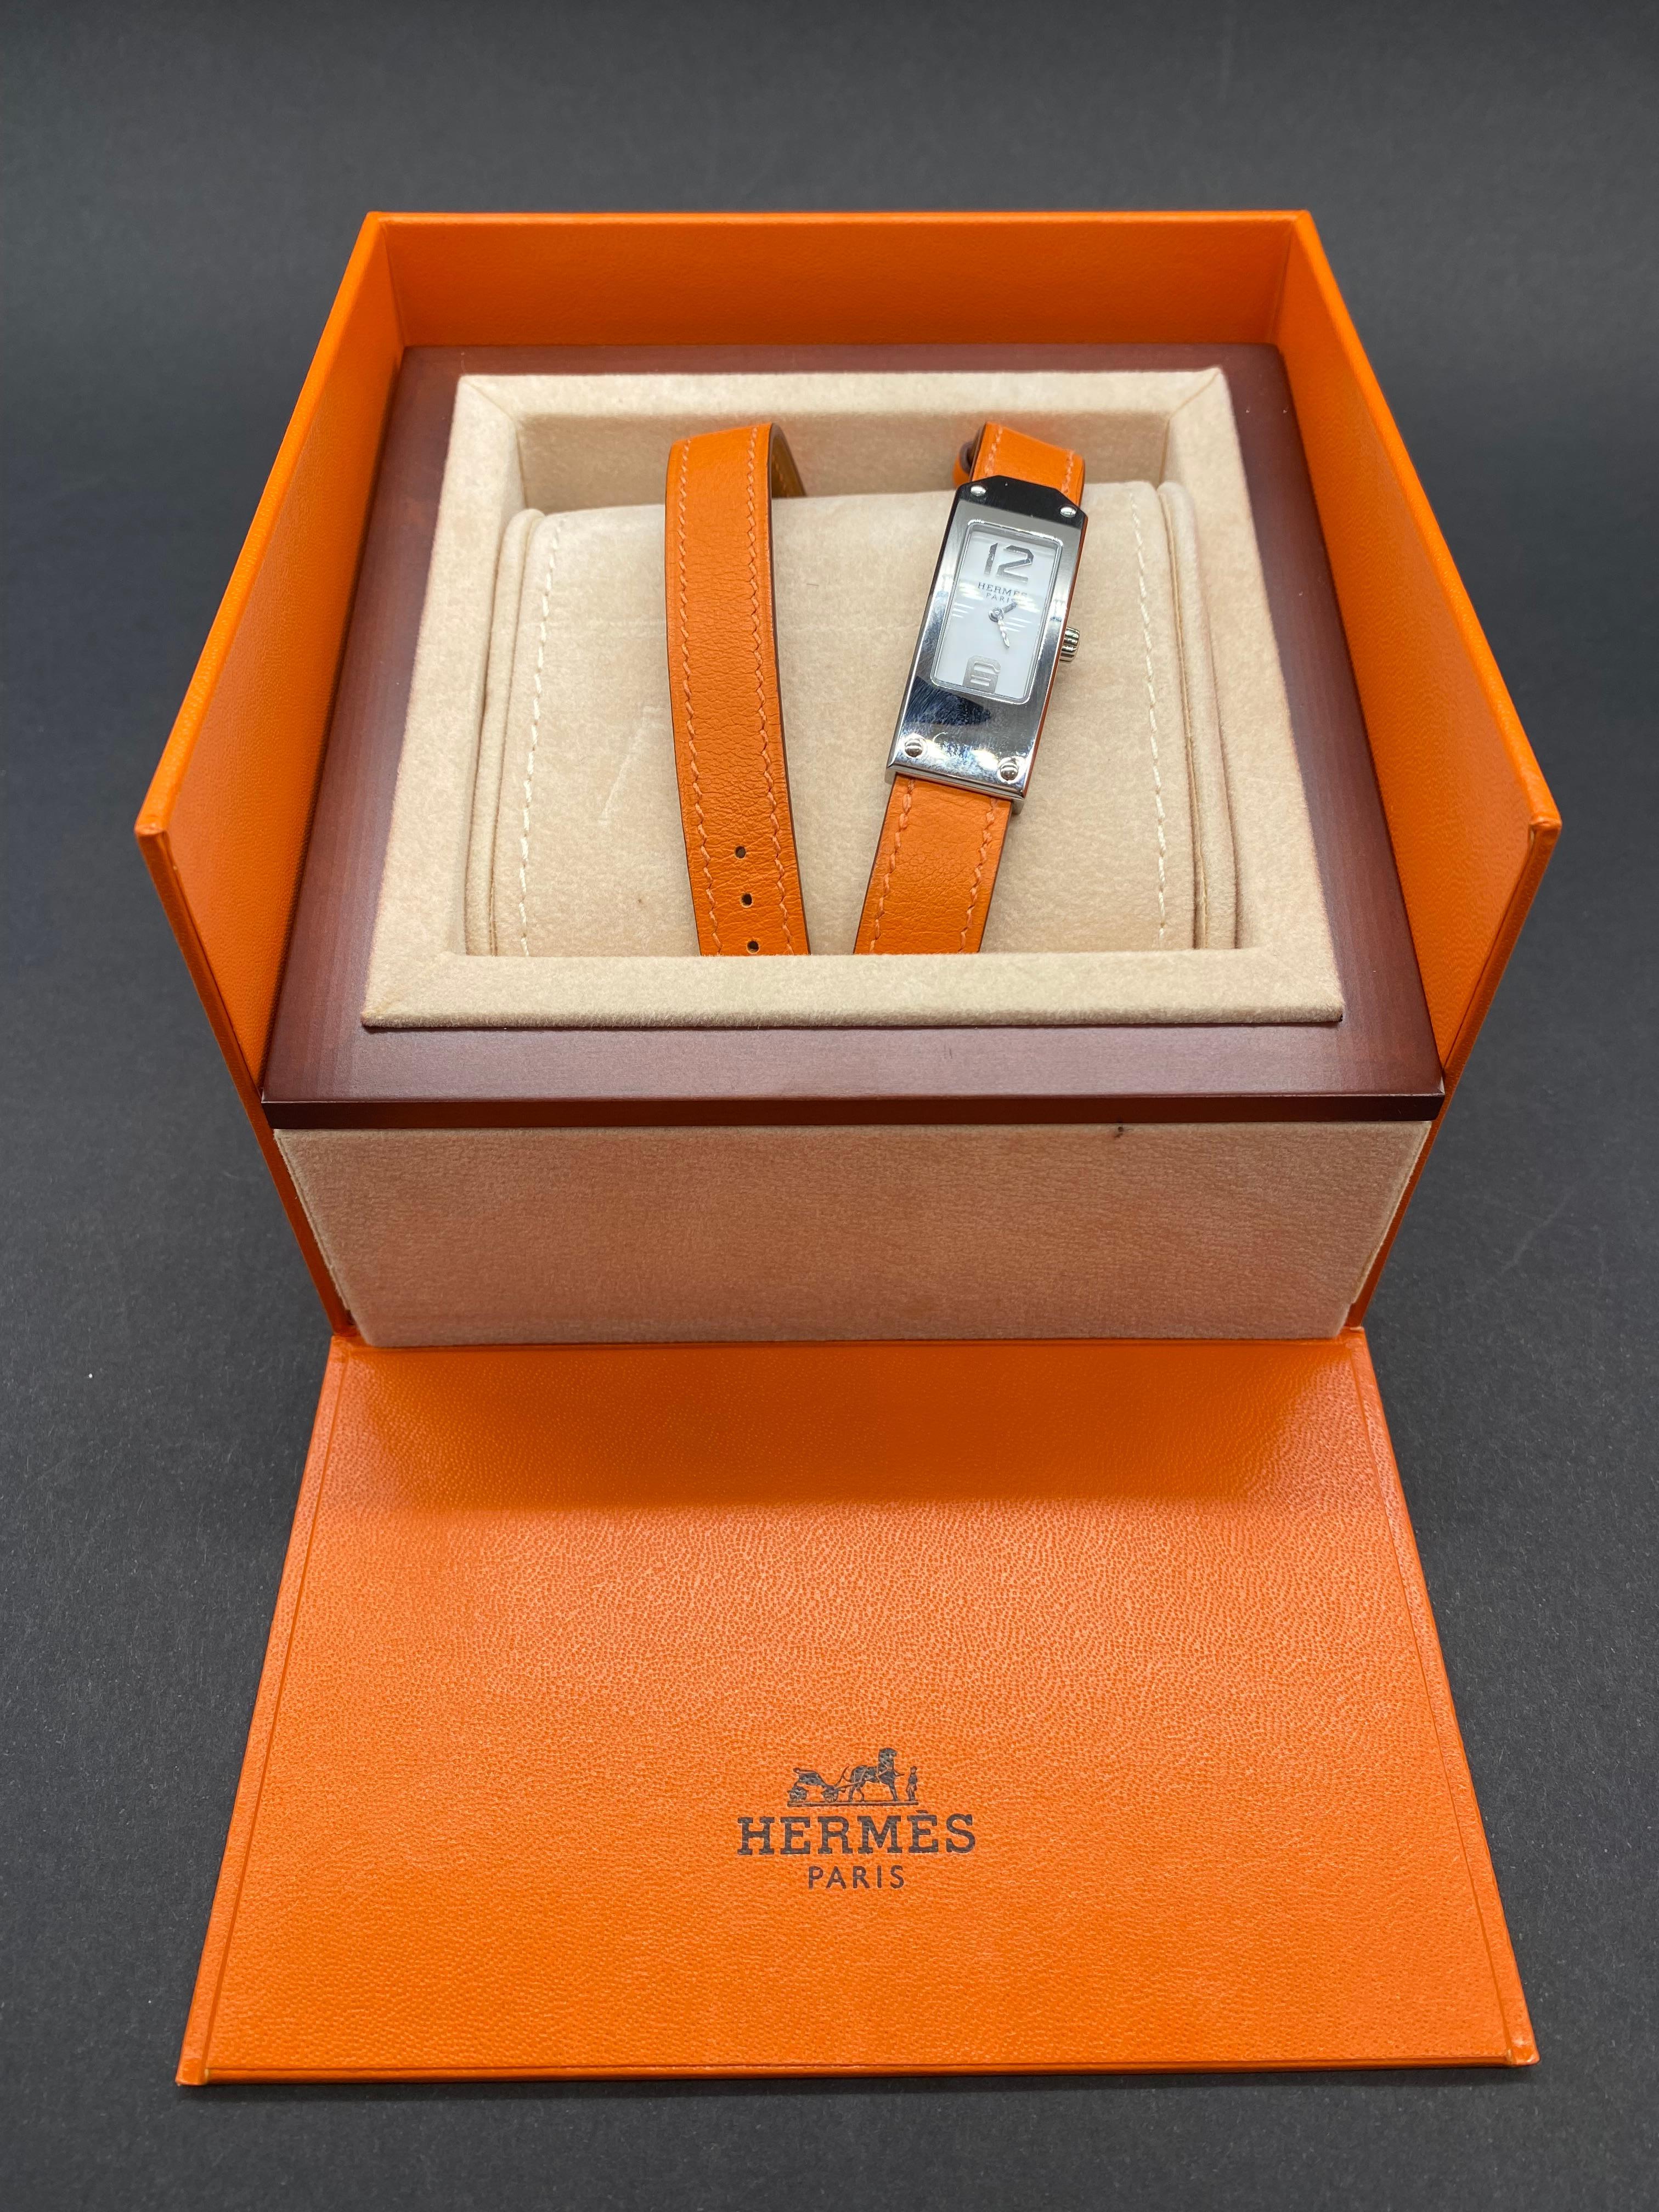 Hermes Watch, Kelly 2
Women’s bracelet watch in steel, white dial with applied Arabic numerals, stylized bezel. Quartz movement. Double row leather strap with steel pin buckle. 
Signed and numbered KT1.210 - 2902043.
As good as New 
Do not hesitate